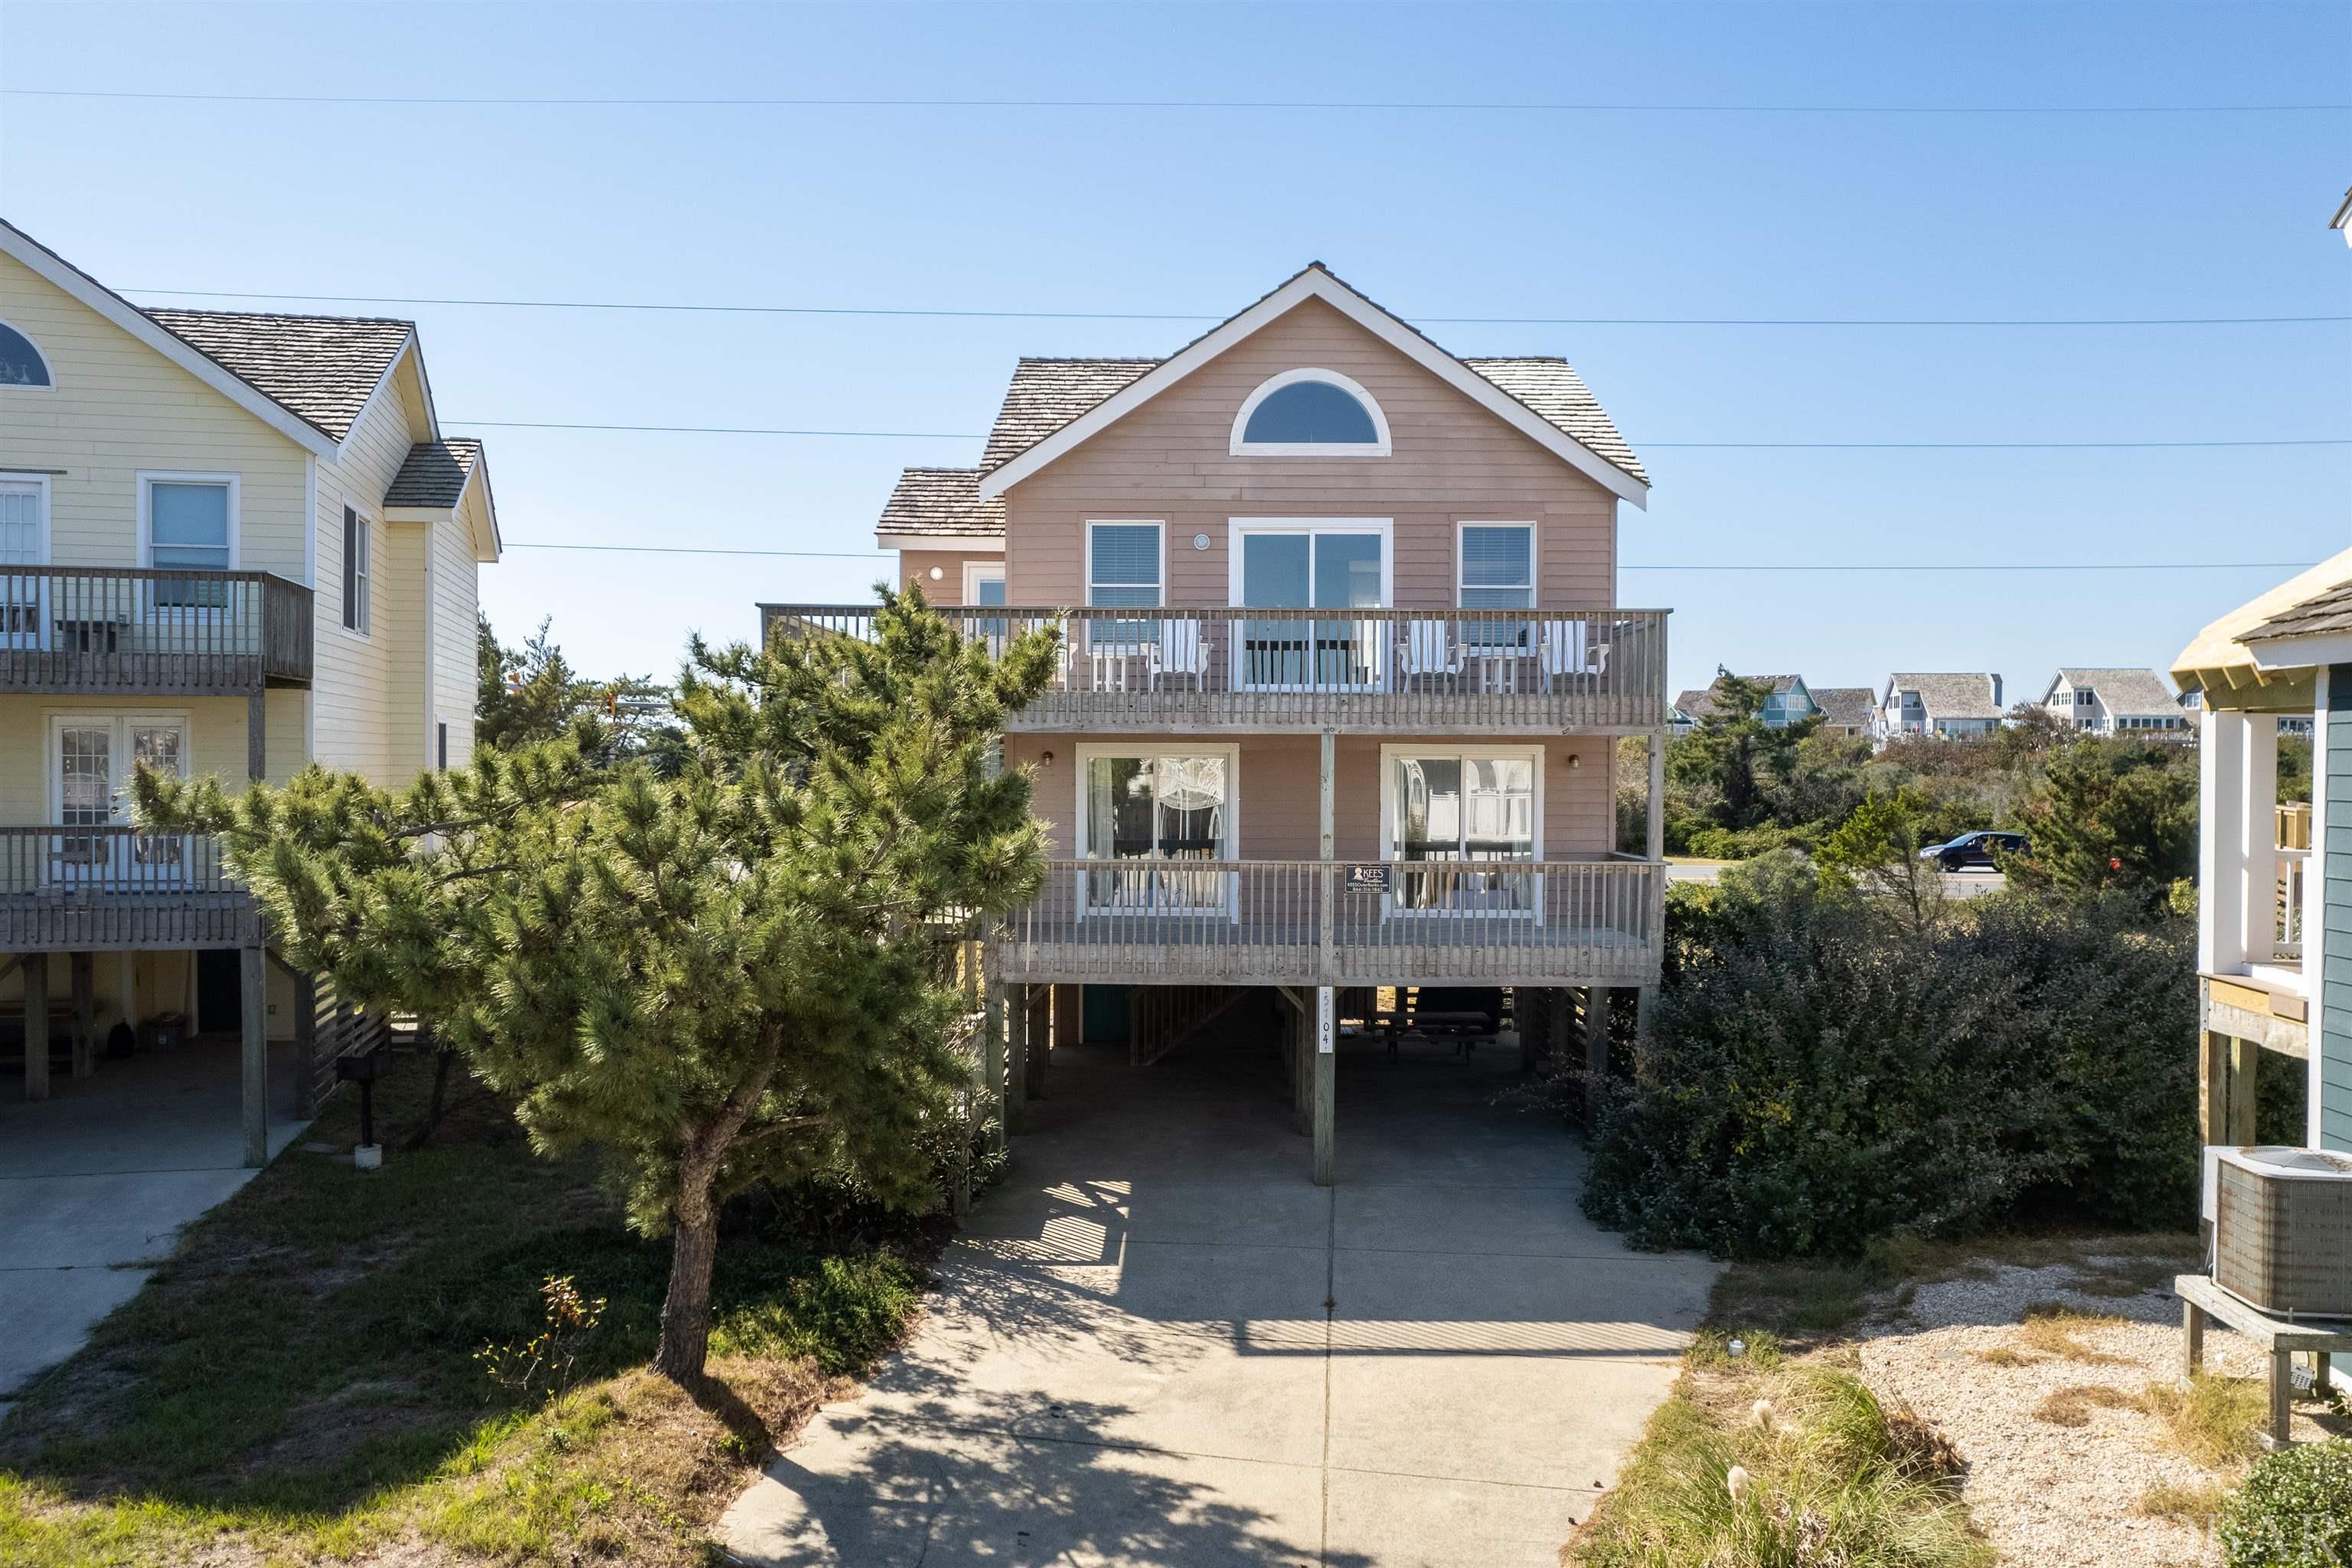 Open House - Sunday, October 29th, 1pm - 3pm.  Nestled in the Village of Nags Head, this investment property or second home offers location value and close proximity to the beach, the Village Beach Club, Nags Head Golf Links and area attractions/shopping.  Designed with an open floorplan, this 4BR, 2.5BA property has a roomy kitchen with eat-on bar, combined living room/dining room, upper level master with ensuite bath, three mid-level guest rooms, full bathroom, utility room and multiple bi-level decks offering ocean views.  Interior features include a cathedral ceiling, gas fireplace with surround, built-in cabinetry, and hardwood floors.  Sold furnished with no exclusions, this property is turn-key ready and ready for its next owners.  The Village at Nags Head Property Owner's Association website is www.vnhpoa.com for details of services and amenities. NEW cedar shake roof, 12/2021. There is a 50-amp hot tub circuit installed and ready for a future hot tub install if buyer desired - per property manager, rental income could be increased 10%-15% with hot tub installation.